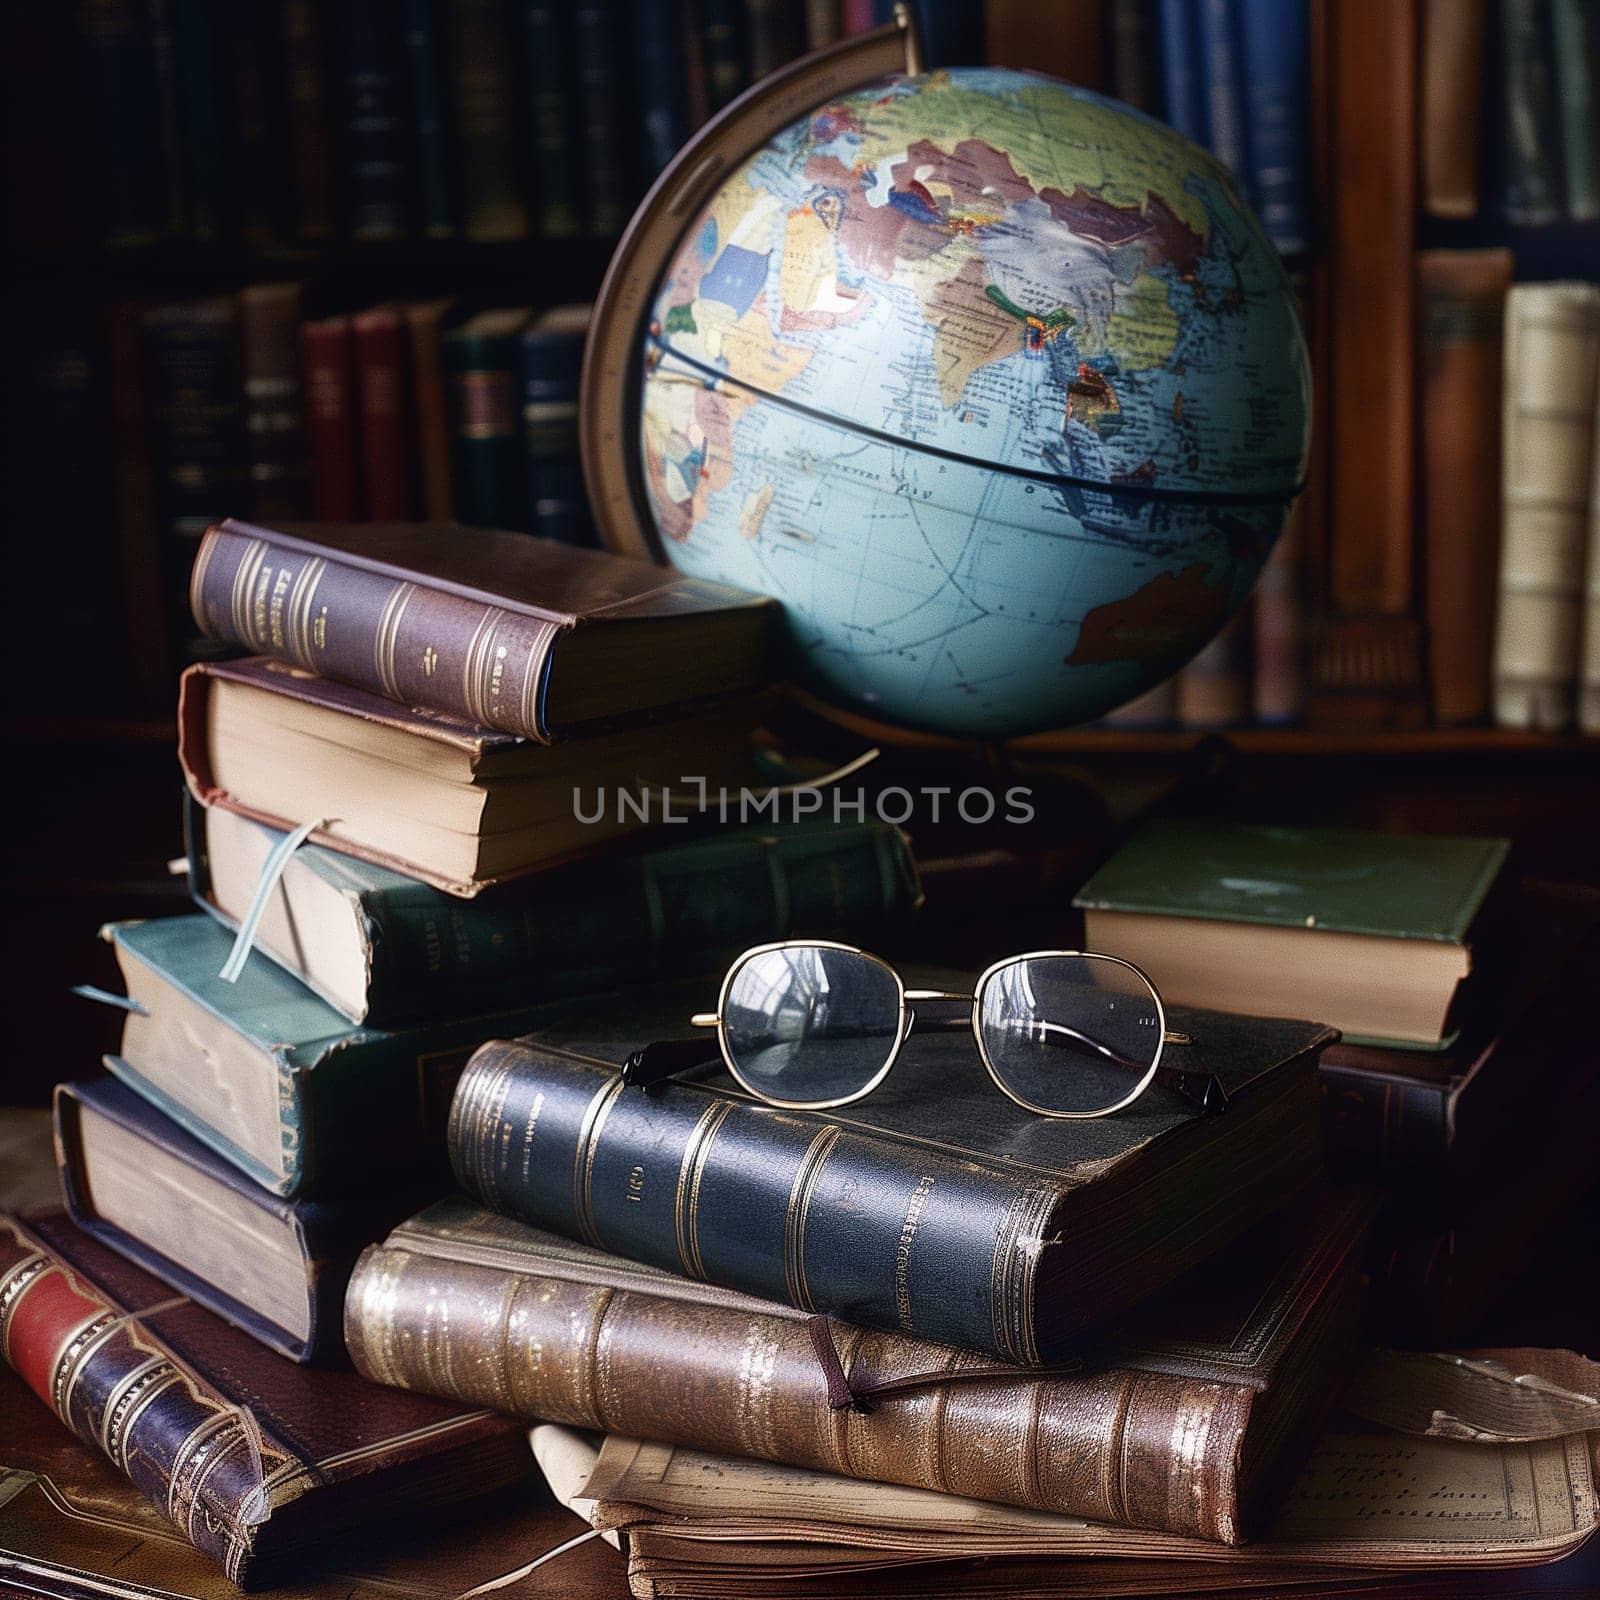 A still life of books, glasses and a globe for education by NeuroSky